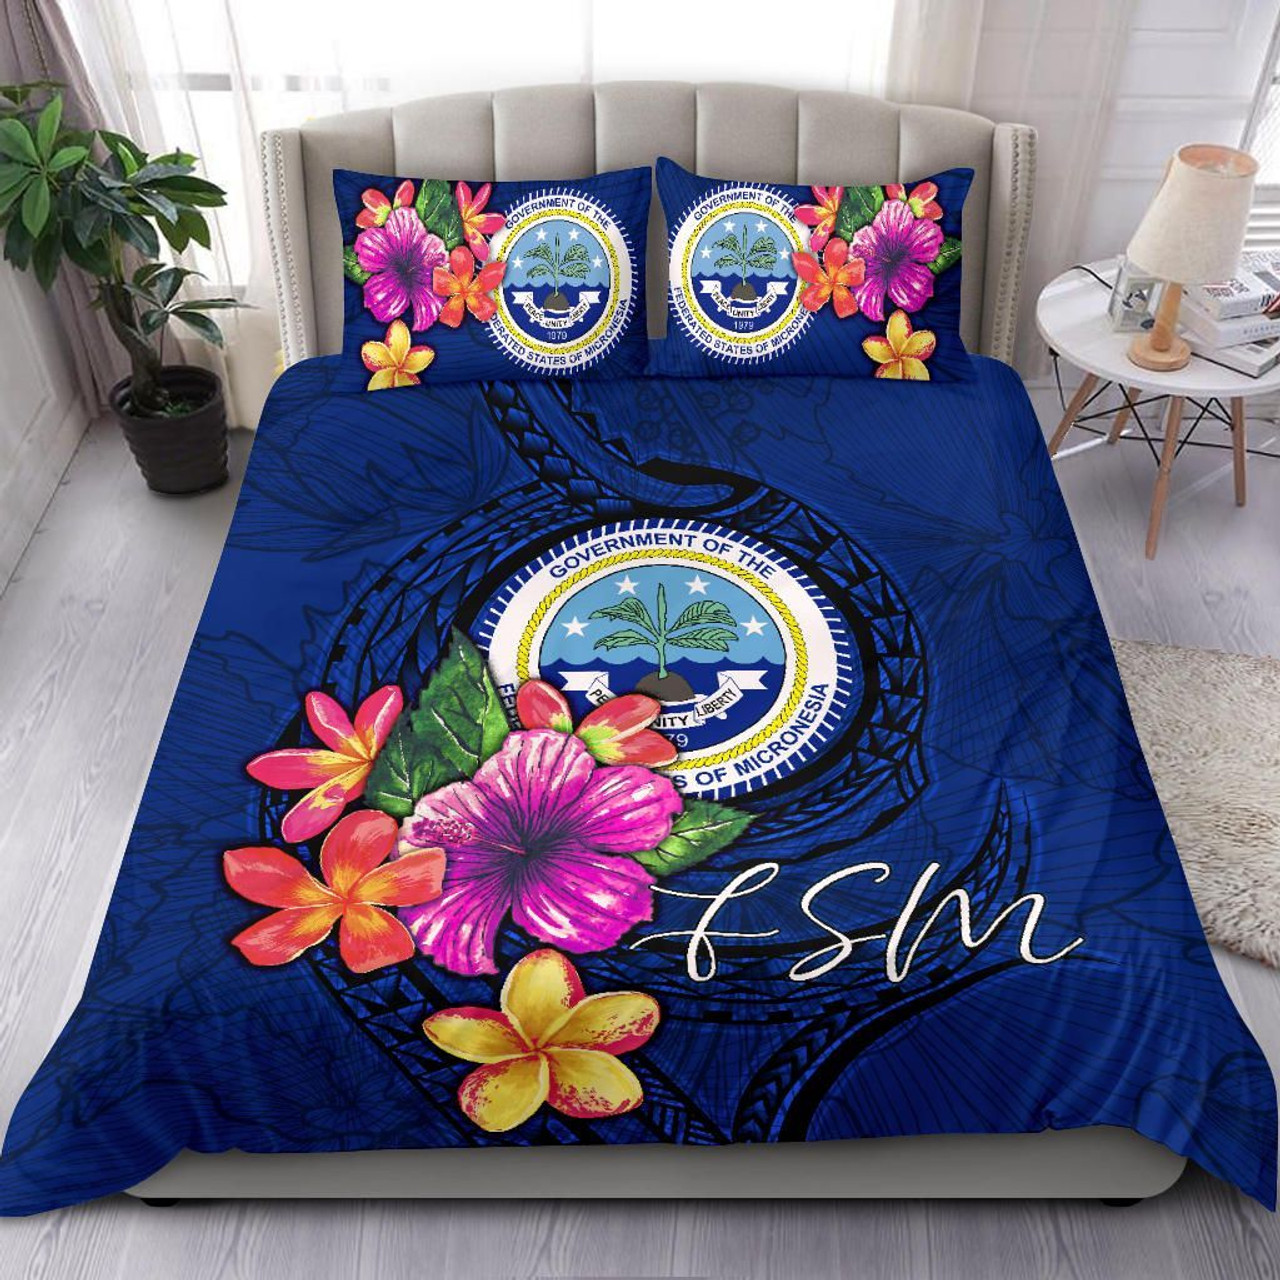 Micronesia Bedding Set - Federated States Of Micronesia Duvet Cover Set Floral With Seal Blue 1